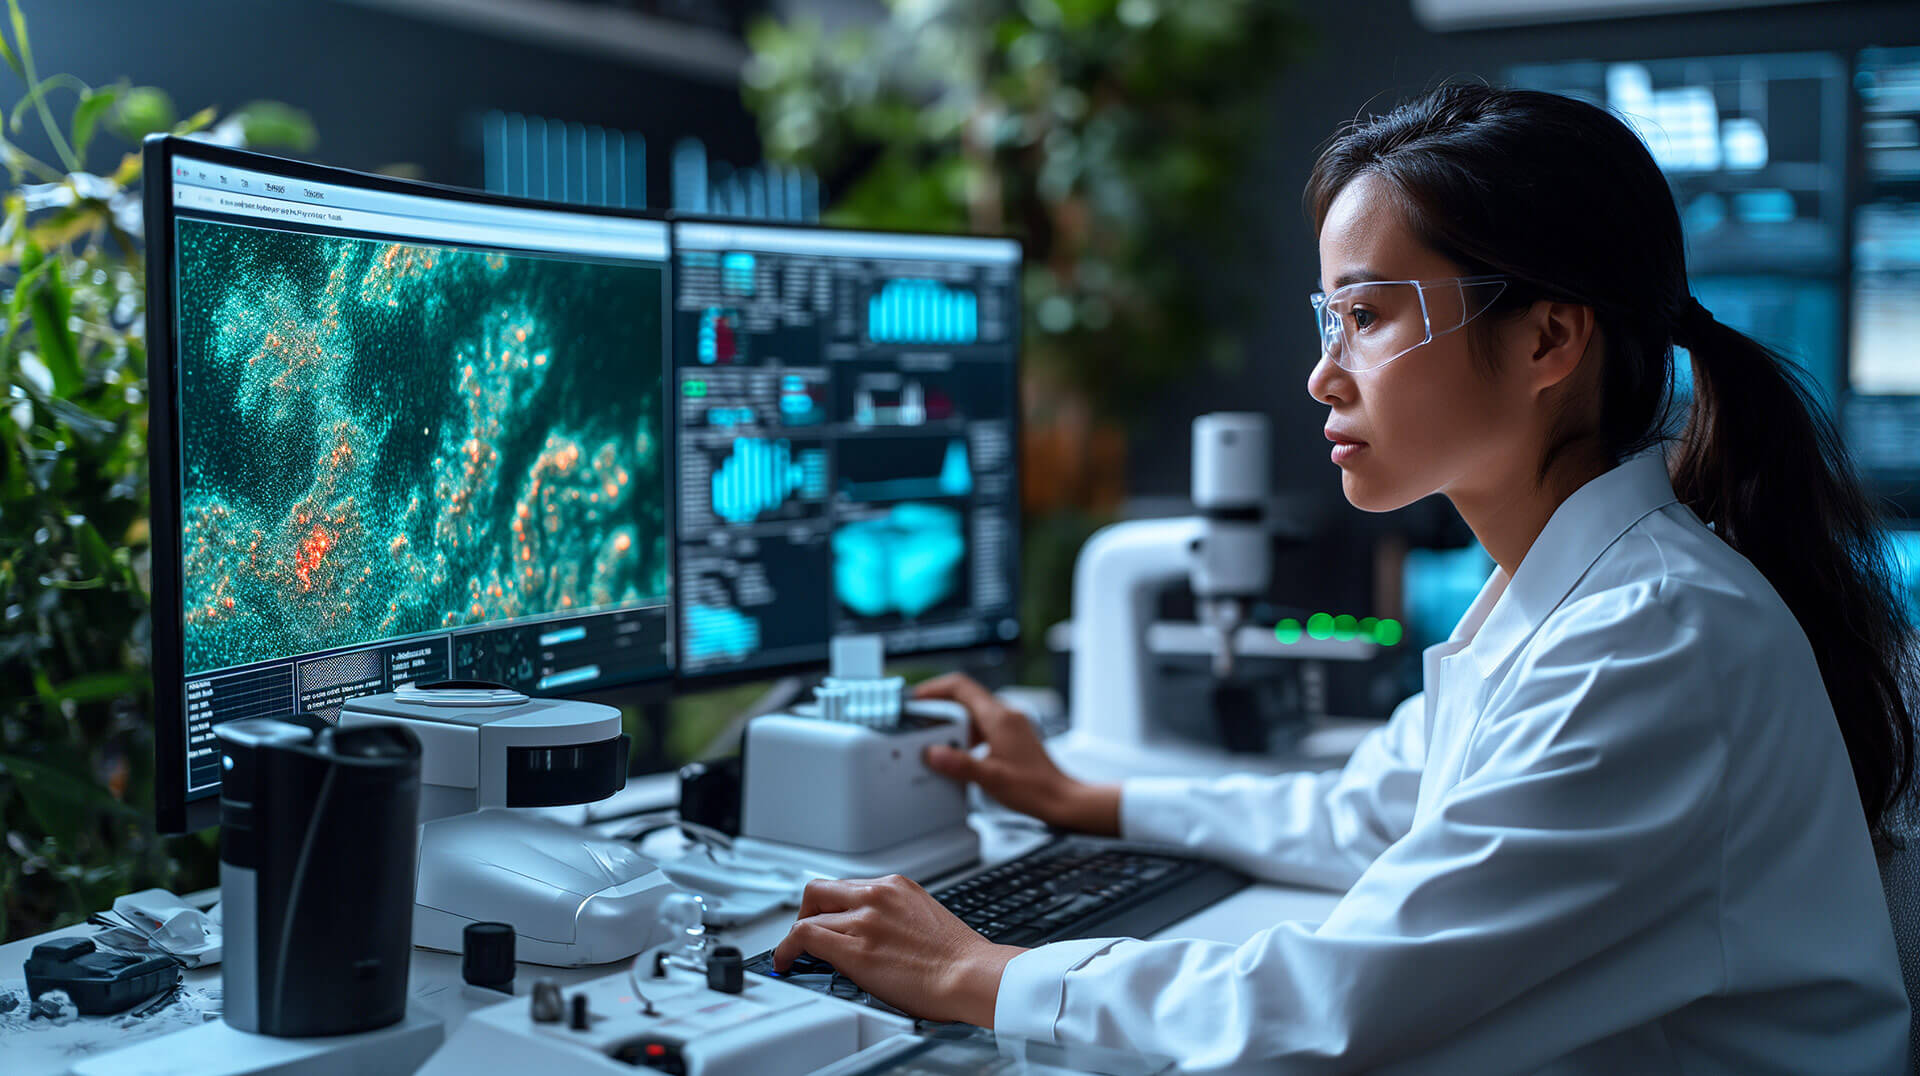 The role of data analytics in precision medicine. Data analytics has become a cornerstone of precision medicine by enabling doctors and scientists to extract meaningful insights from vast, complex data sets.